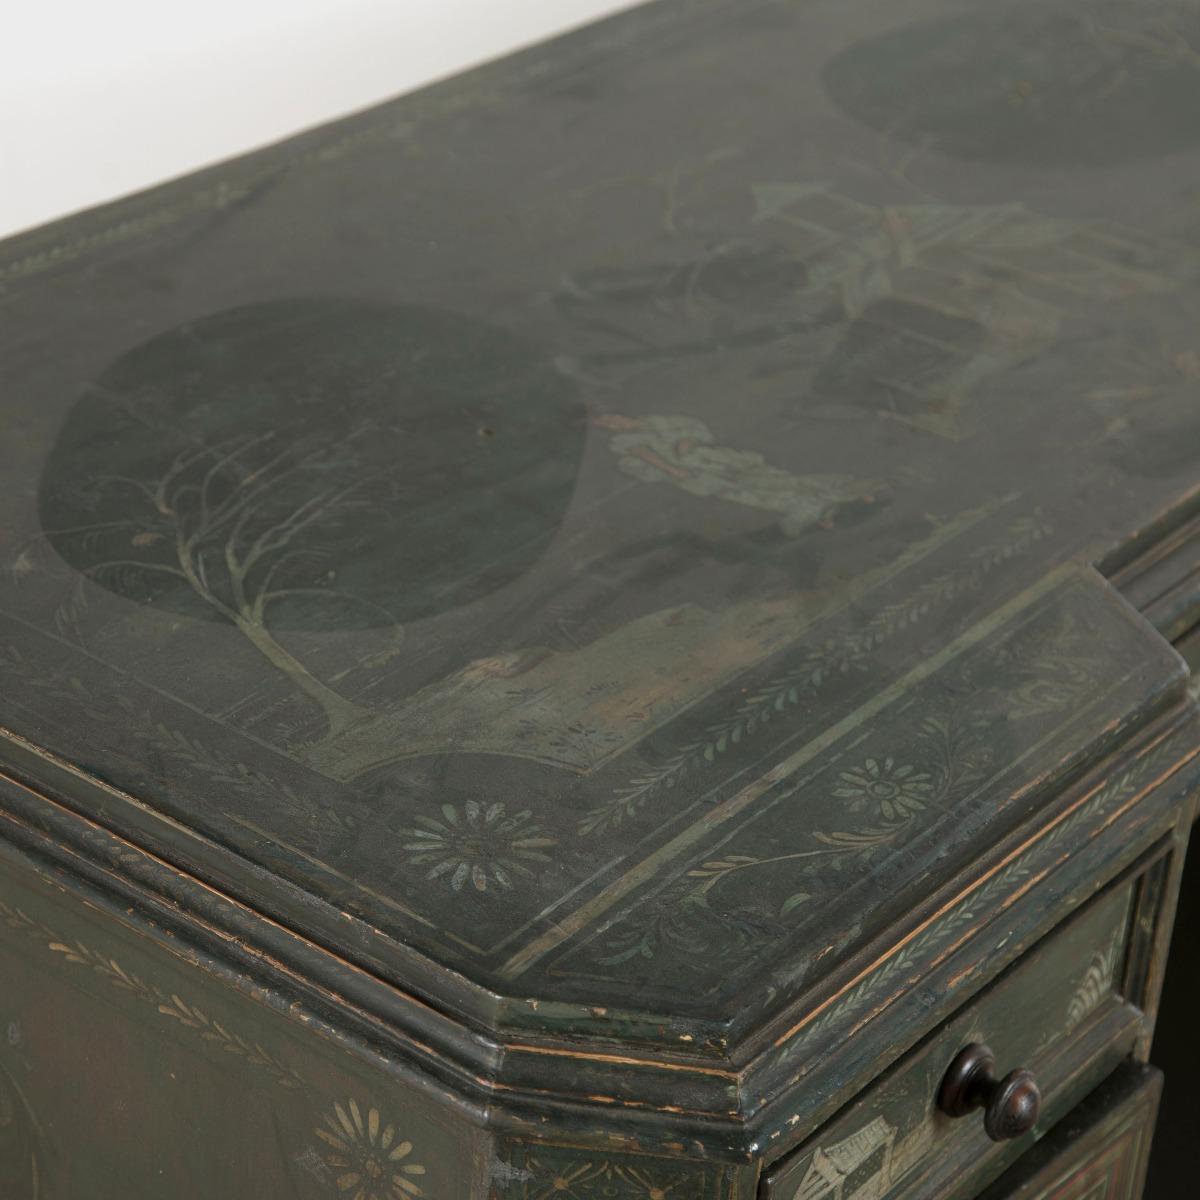 A 19th Century English desk/dressing table featuring its original painted decoration in the then newly fashionable Japanese taste, circa 1880.